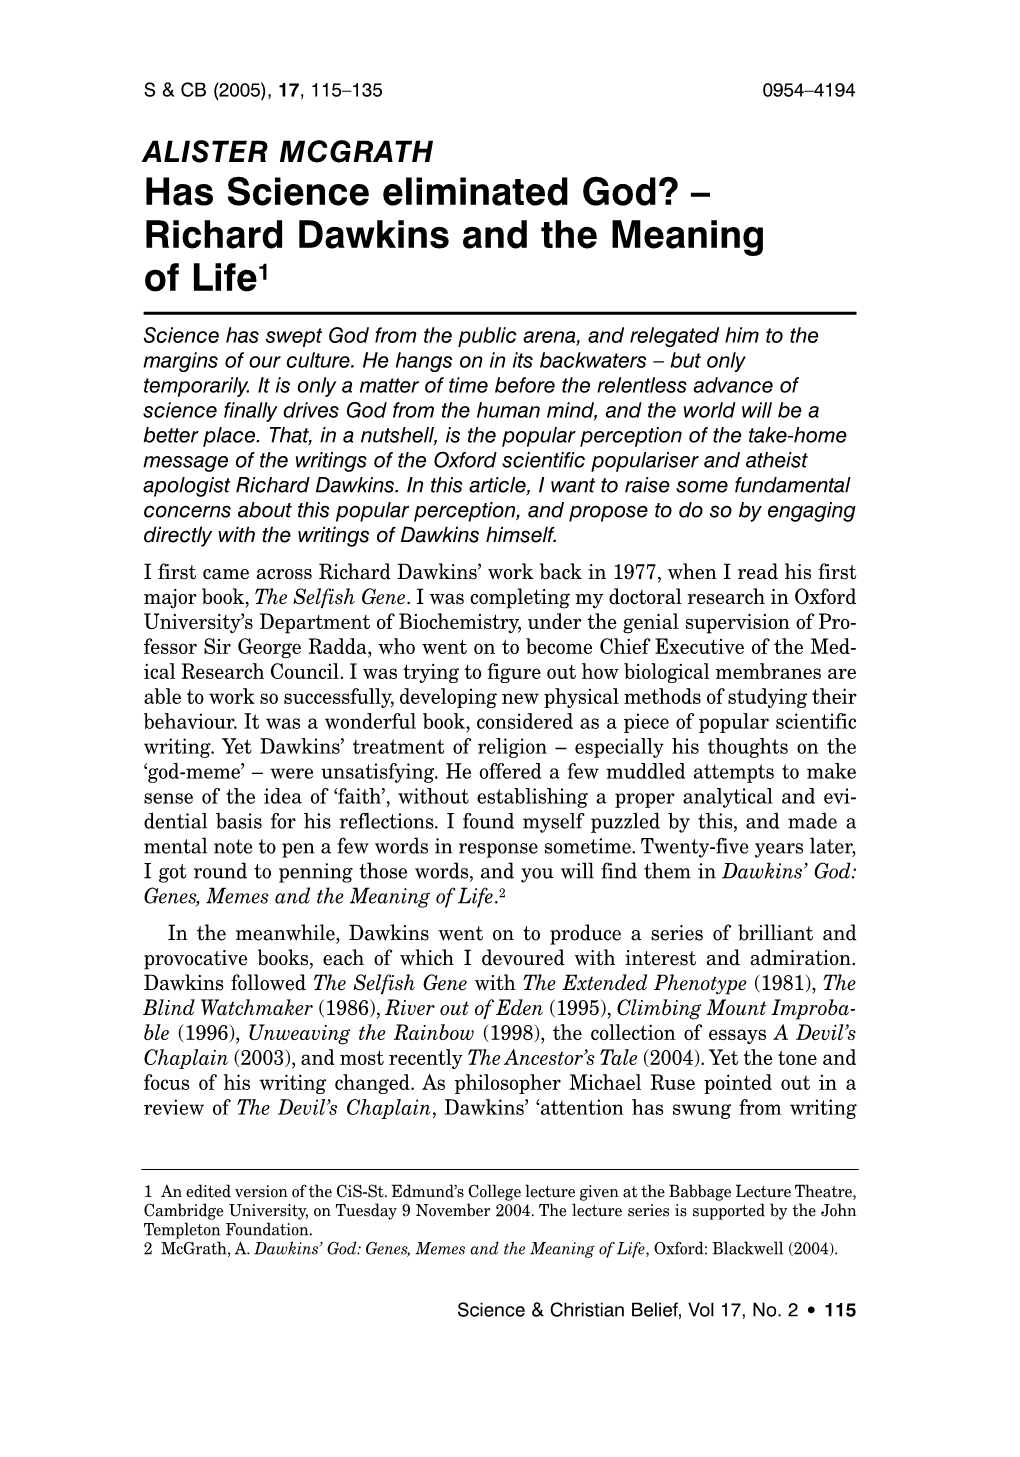 Has Science Eliminated God? – Richard Dawkins and the Meaning of Life1